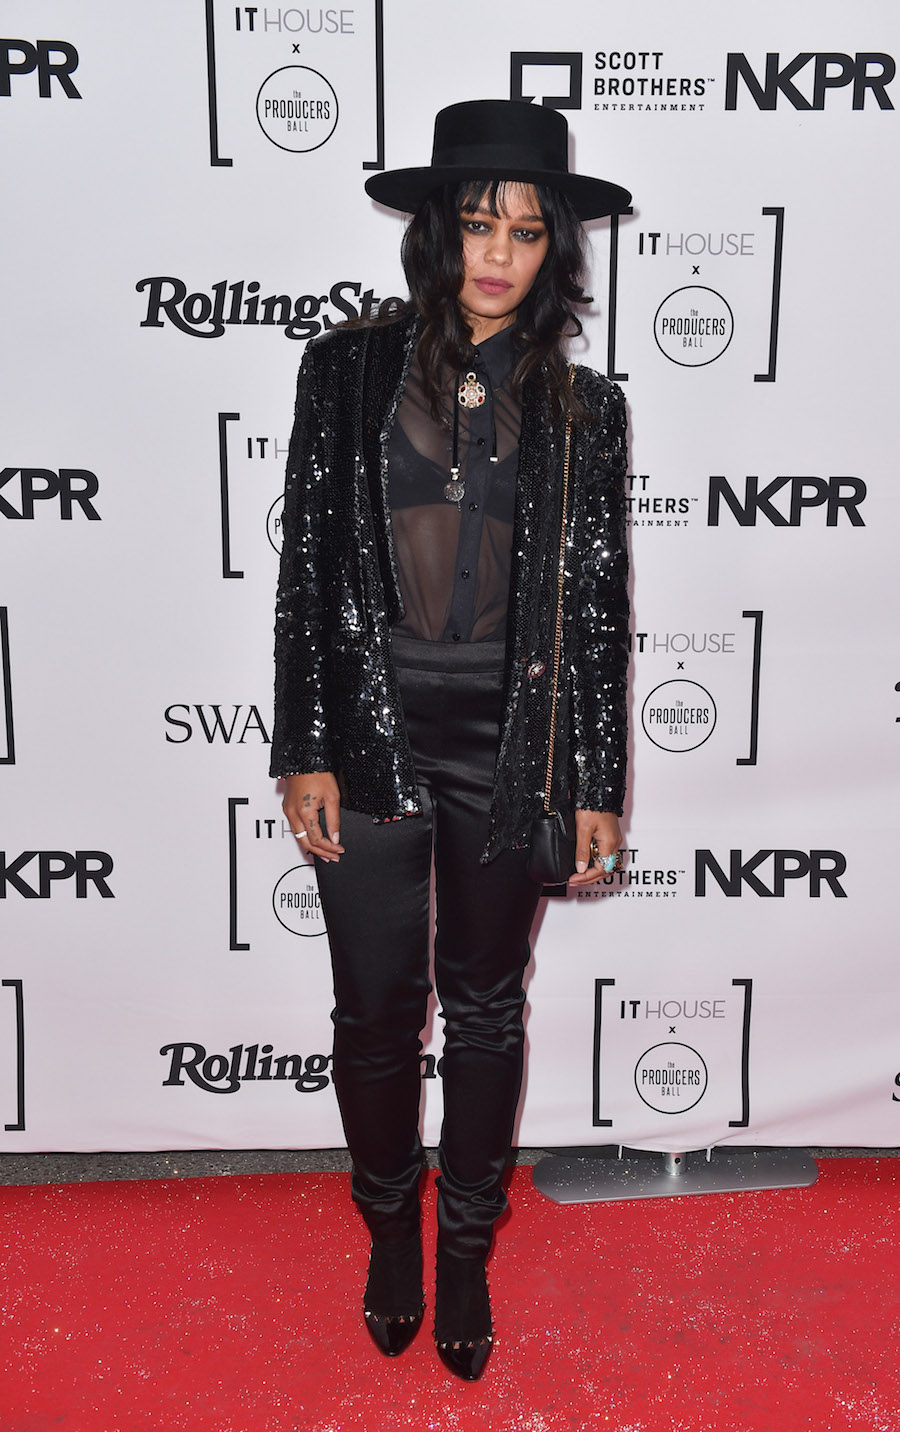 Fefe Dobson at the IT House x Producers Ball (Photo: Courtesy of NKPR) | View the VIBE